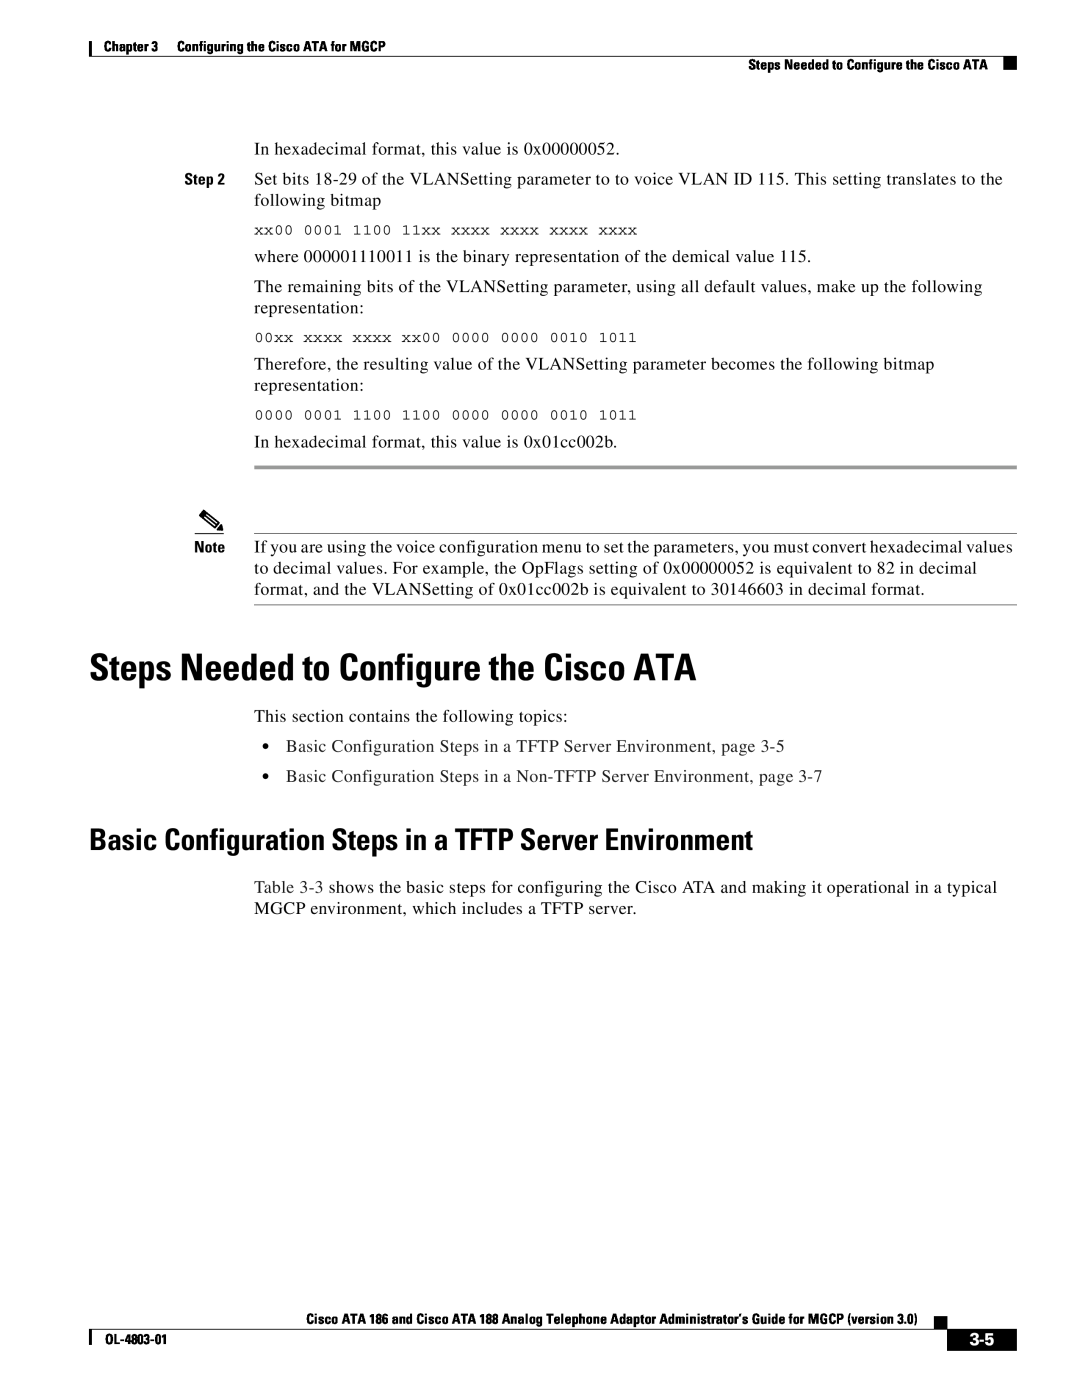 Cisco Systems ATA 188 Steps Needed to Configure the Cisco ATA, Basic Configuration Steps in a TFTP Server Environment 